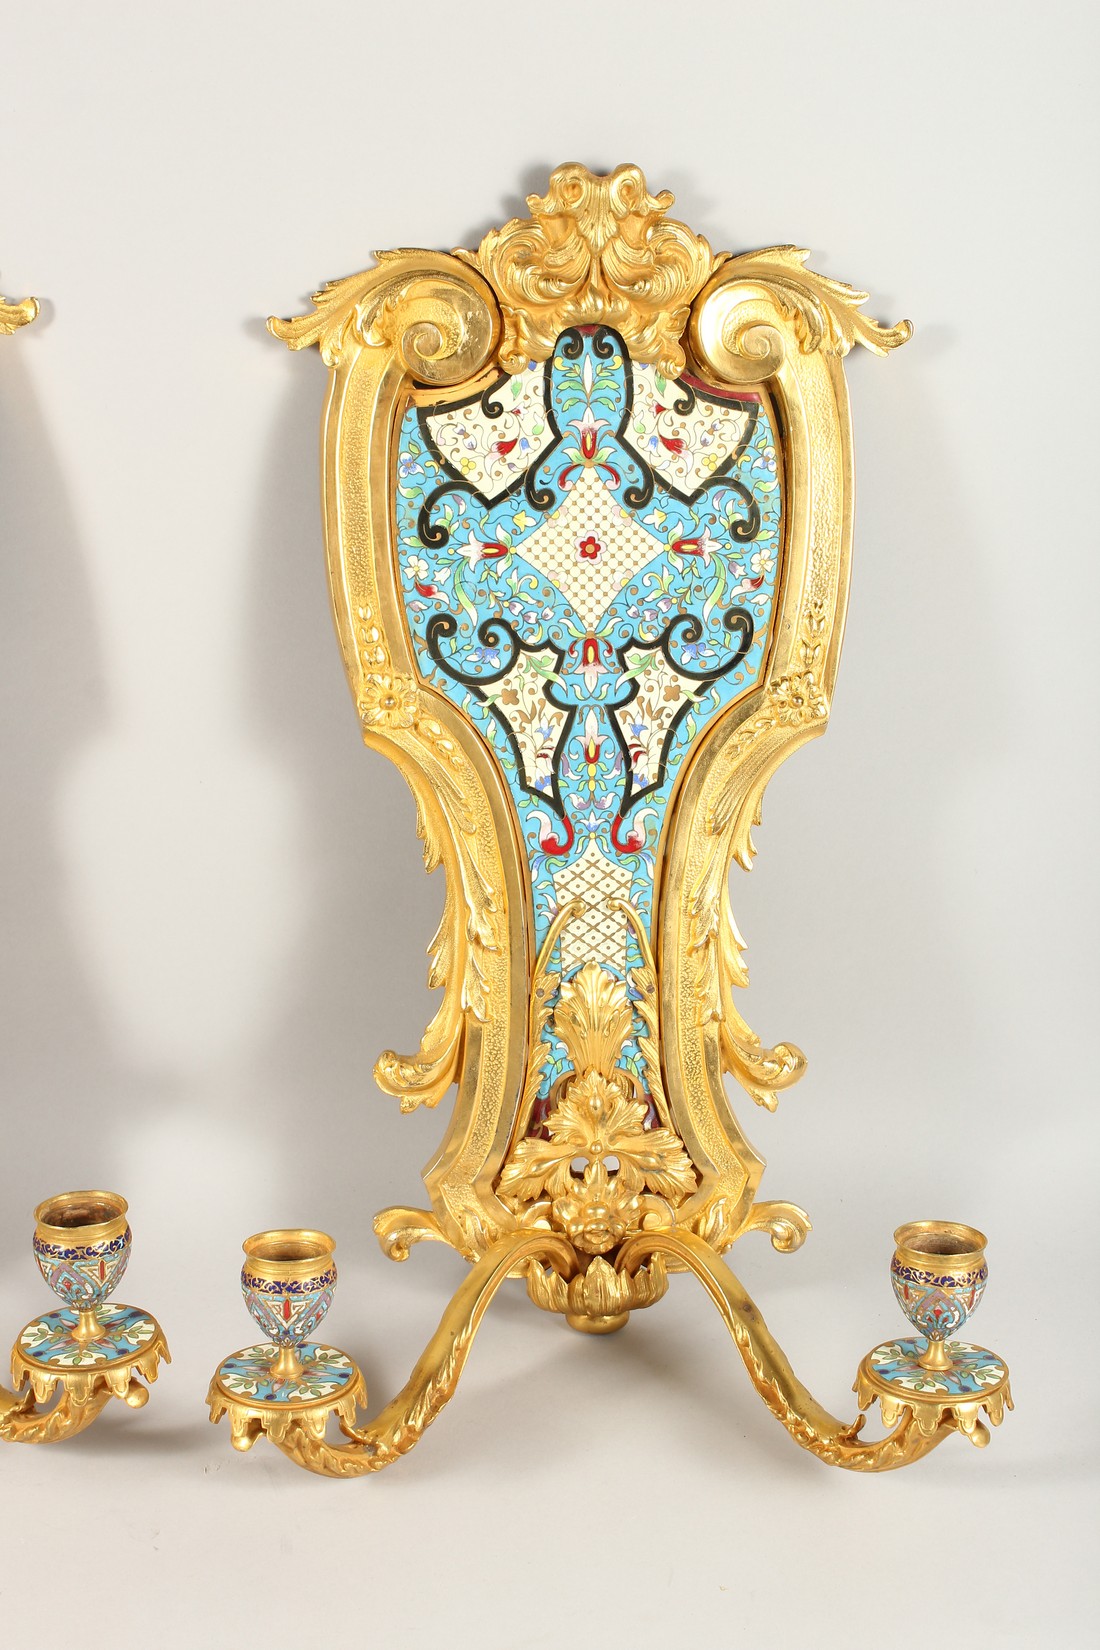 A SUPERB PAIR OF FRENCH ORMOLU AND ENAMEL TWO LIGHT WALL SCONCES WITH ACANTHUS AND SCROLLS 22ins - Image 3 of 7